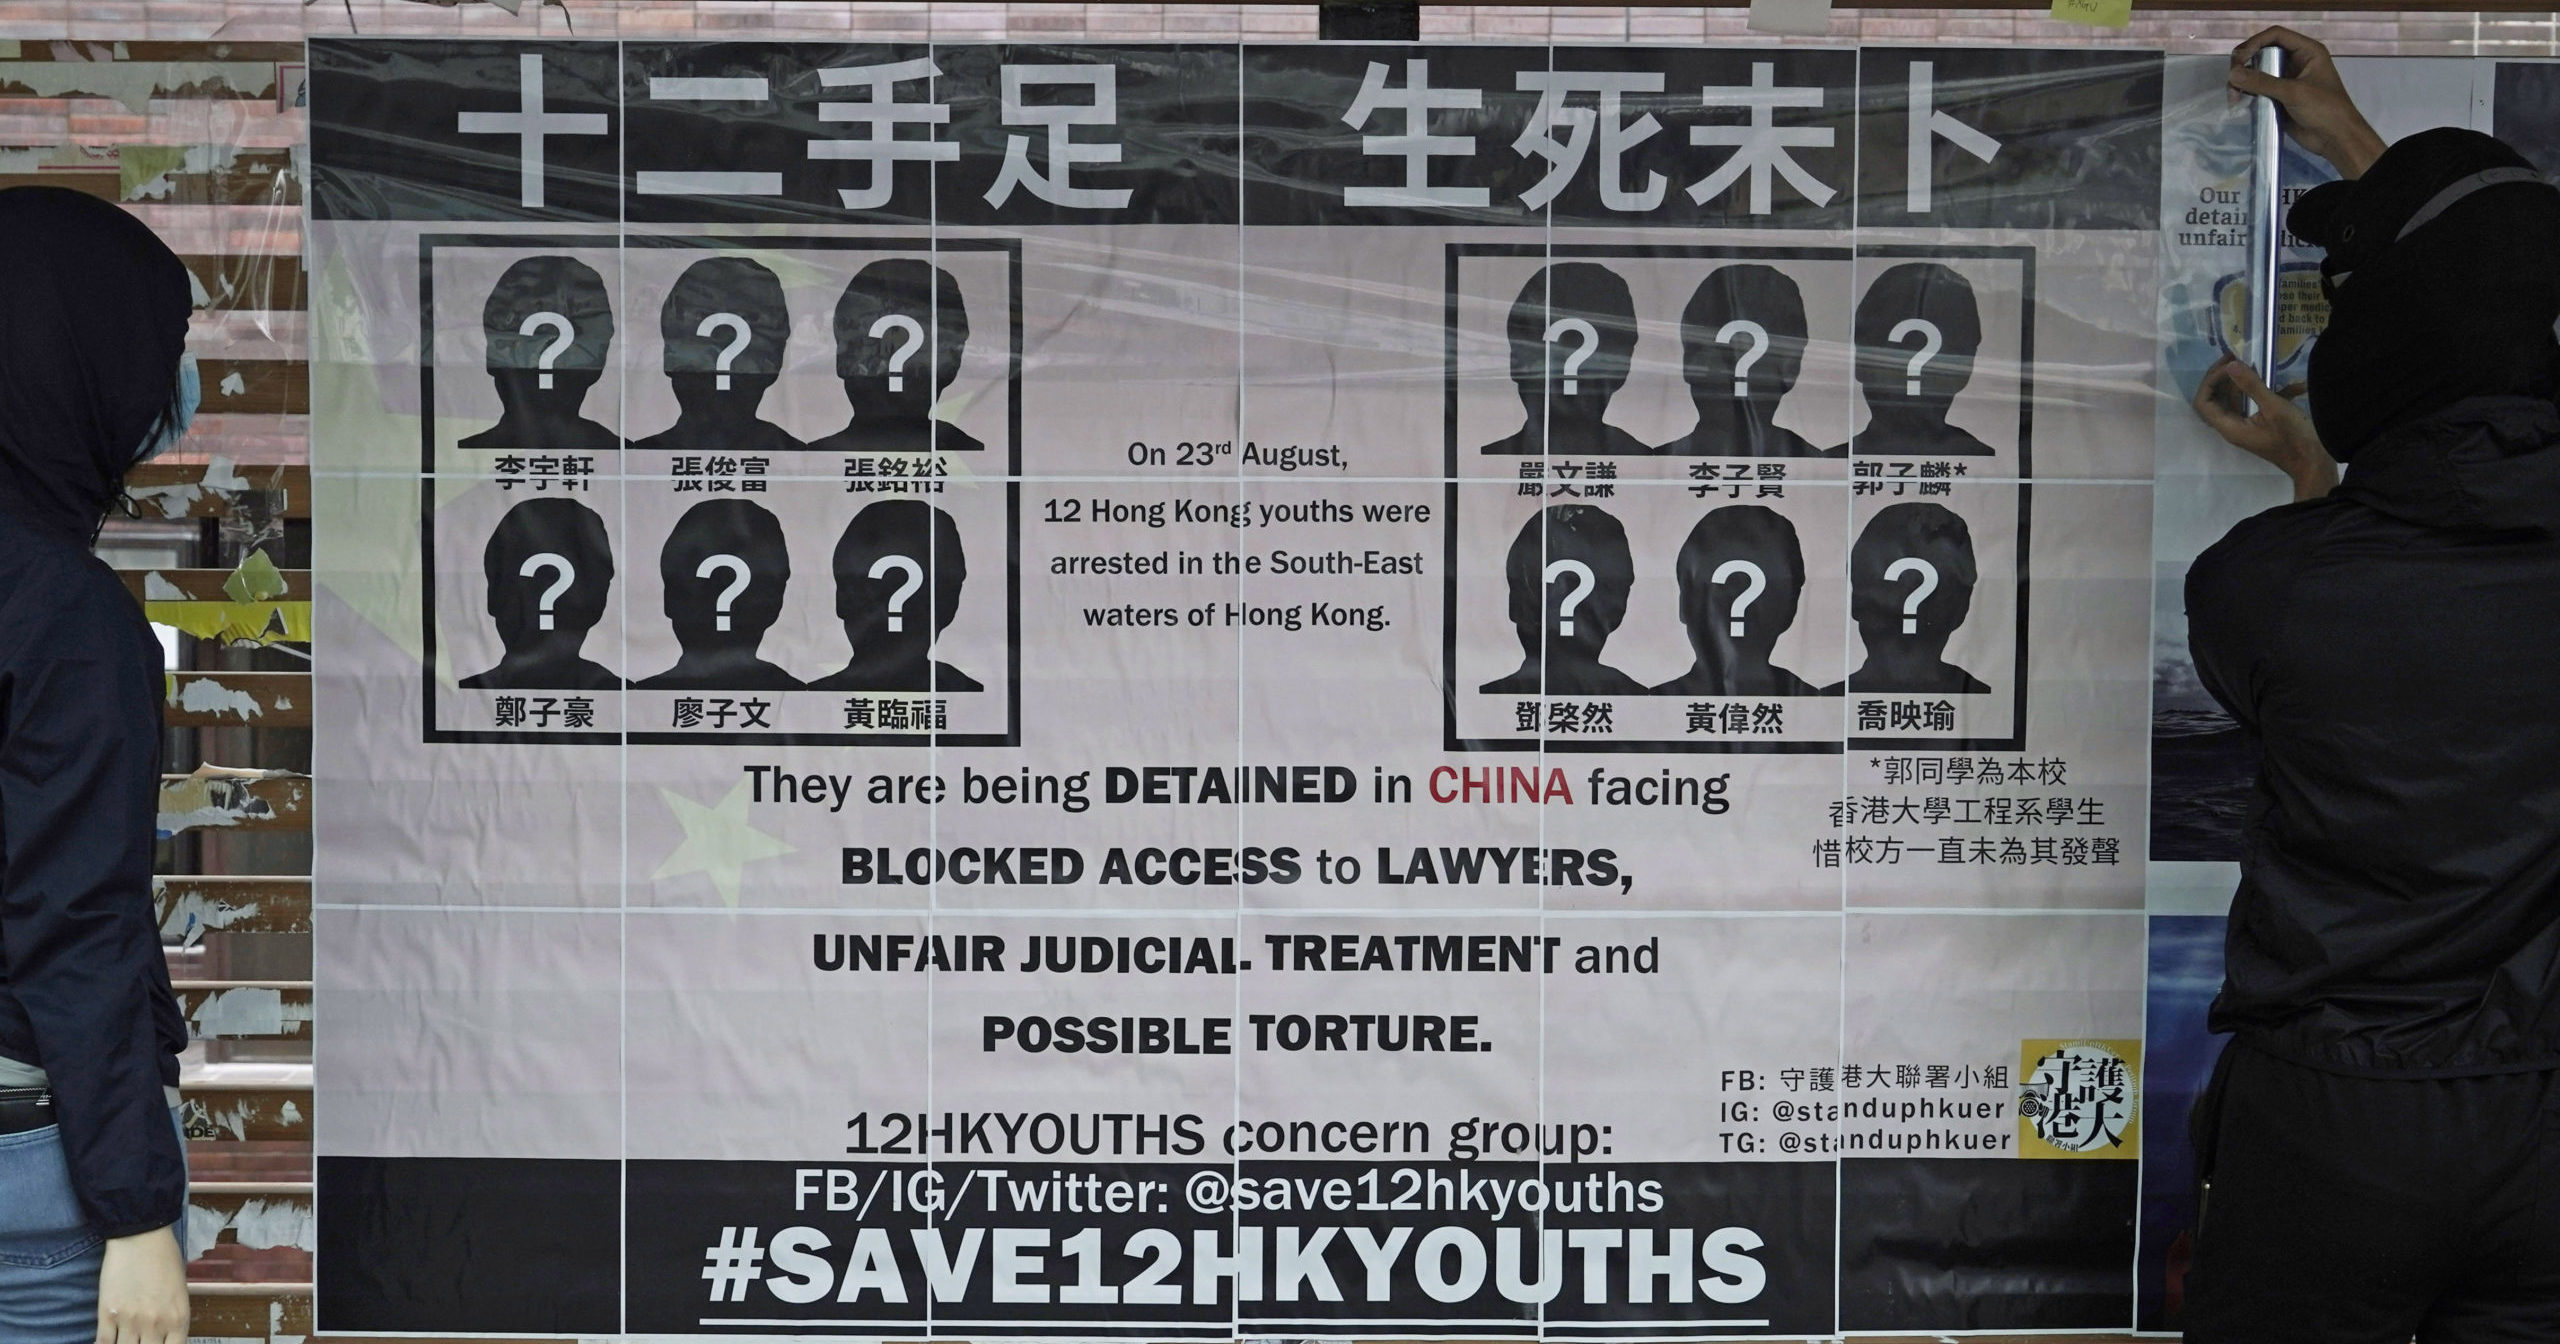 University students put up posters demanding the release of 12 Hong Kong pro-democracy activists detained at sea by Chinese authorities on Sept. 29, 2020.